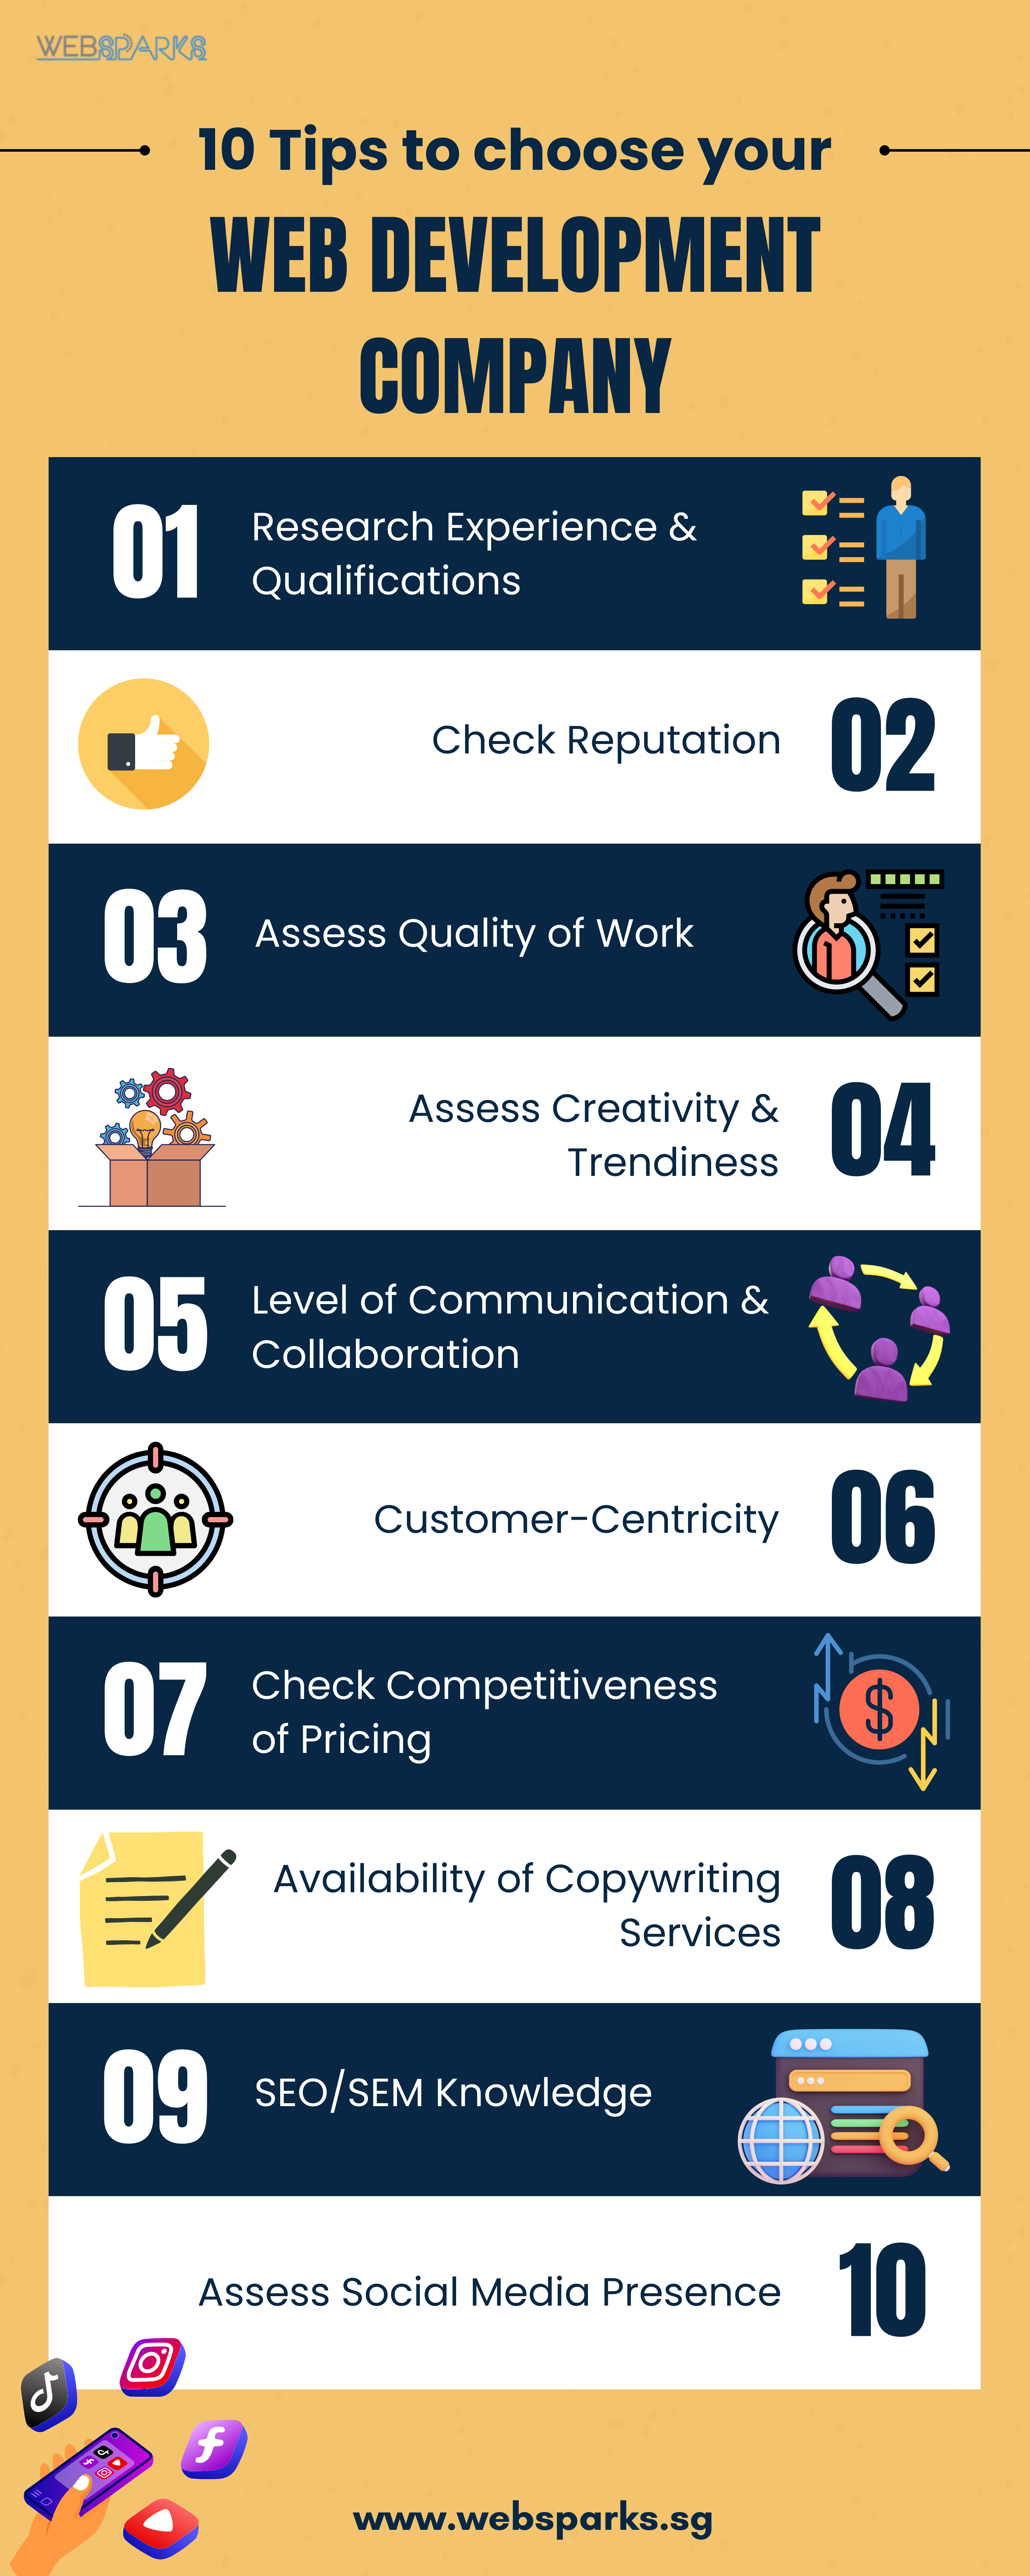 infographic on 10 tips to choose a web development company